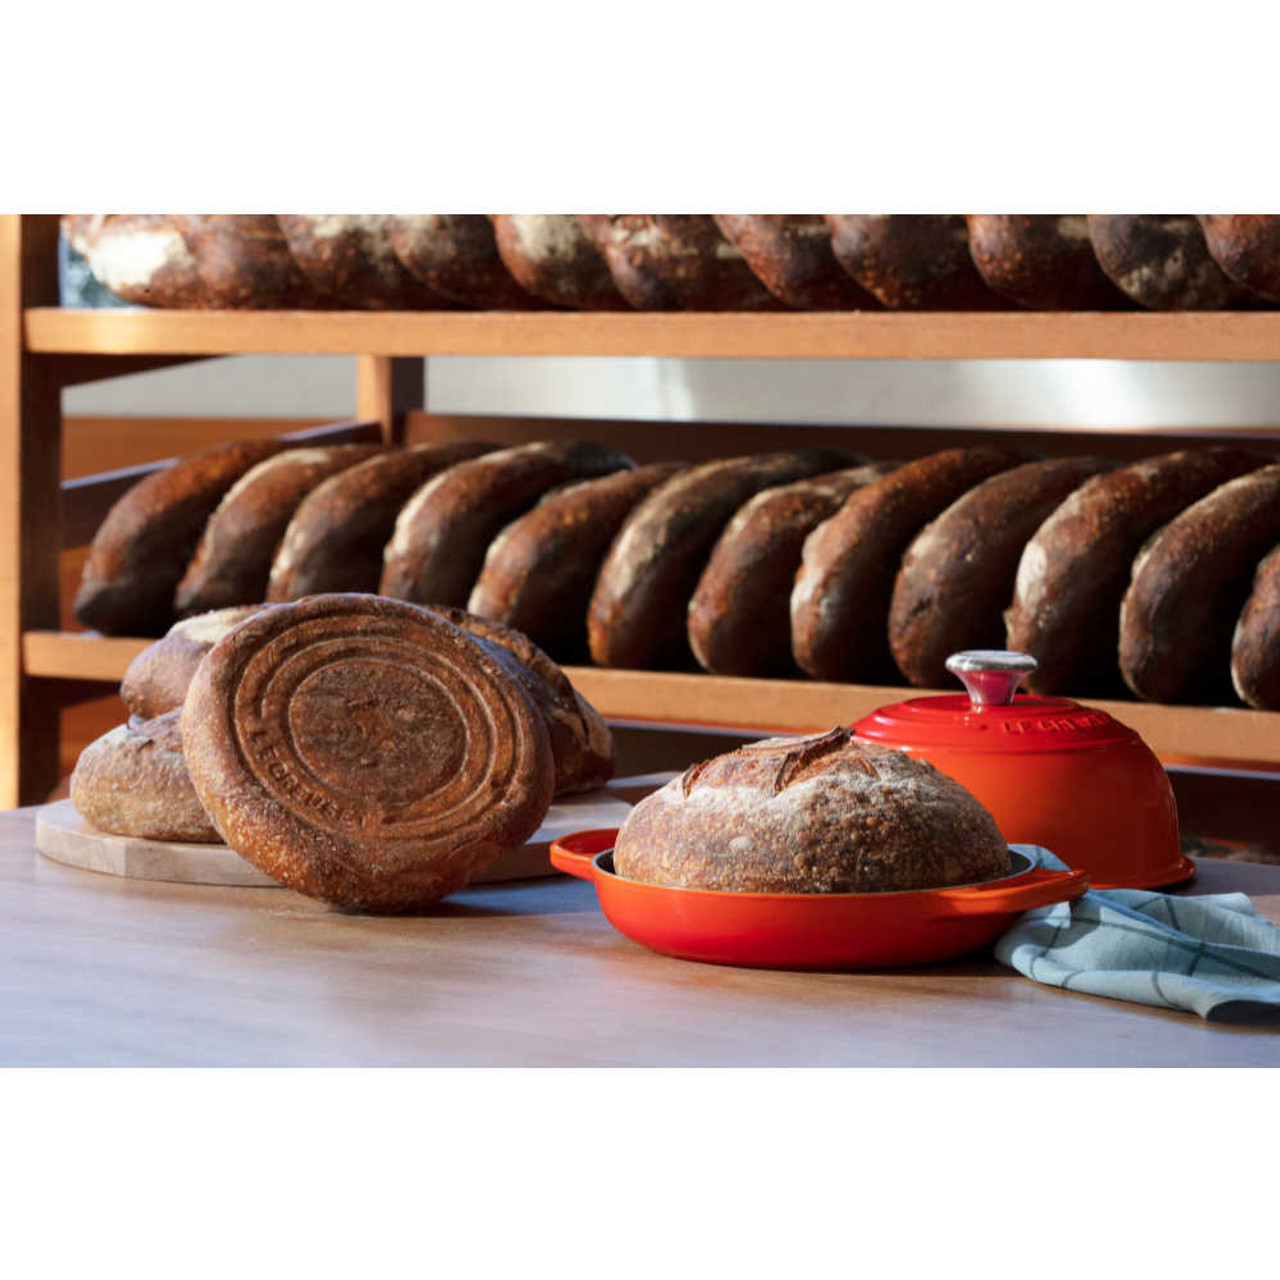 https://cdn11.bigcommerce.com/s-hccytny0od/images/stencil/1280x1280/products/4525/18105/Le_Creuset_Cast_Iron_Bread_Oven_1__88429.1646884695.jpg?c=2?imbypass=on